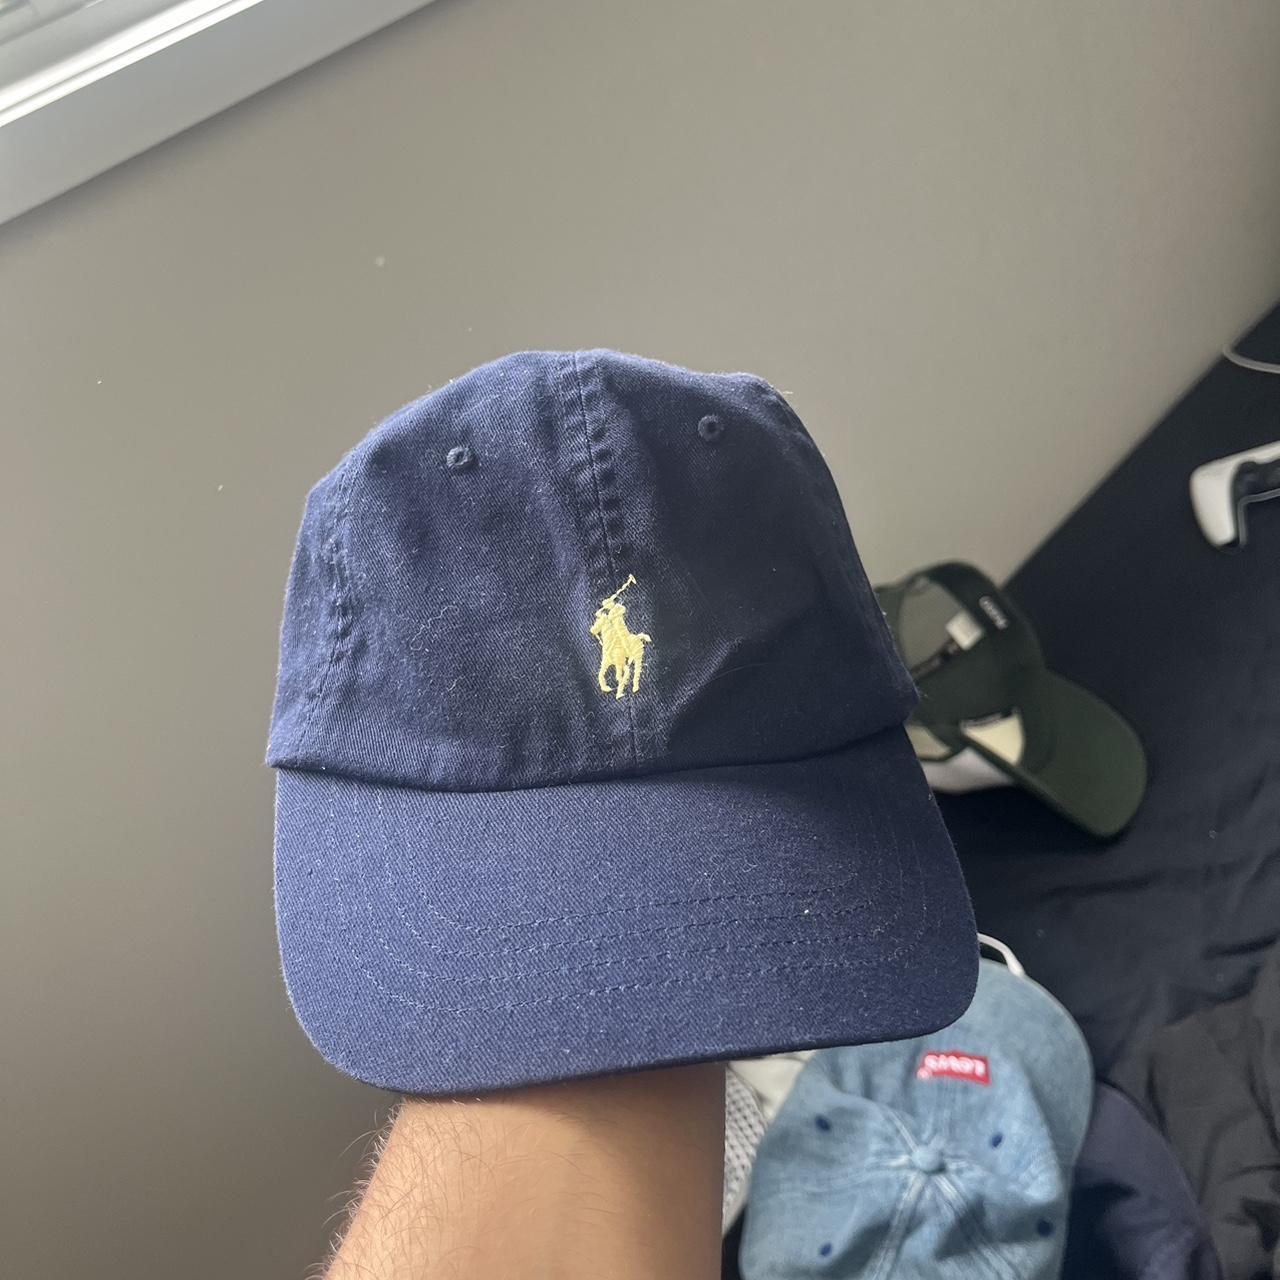 2 polo hats $30 each Both in good condition - Depop